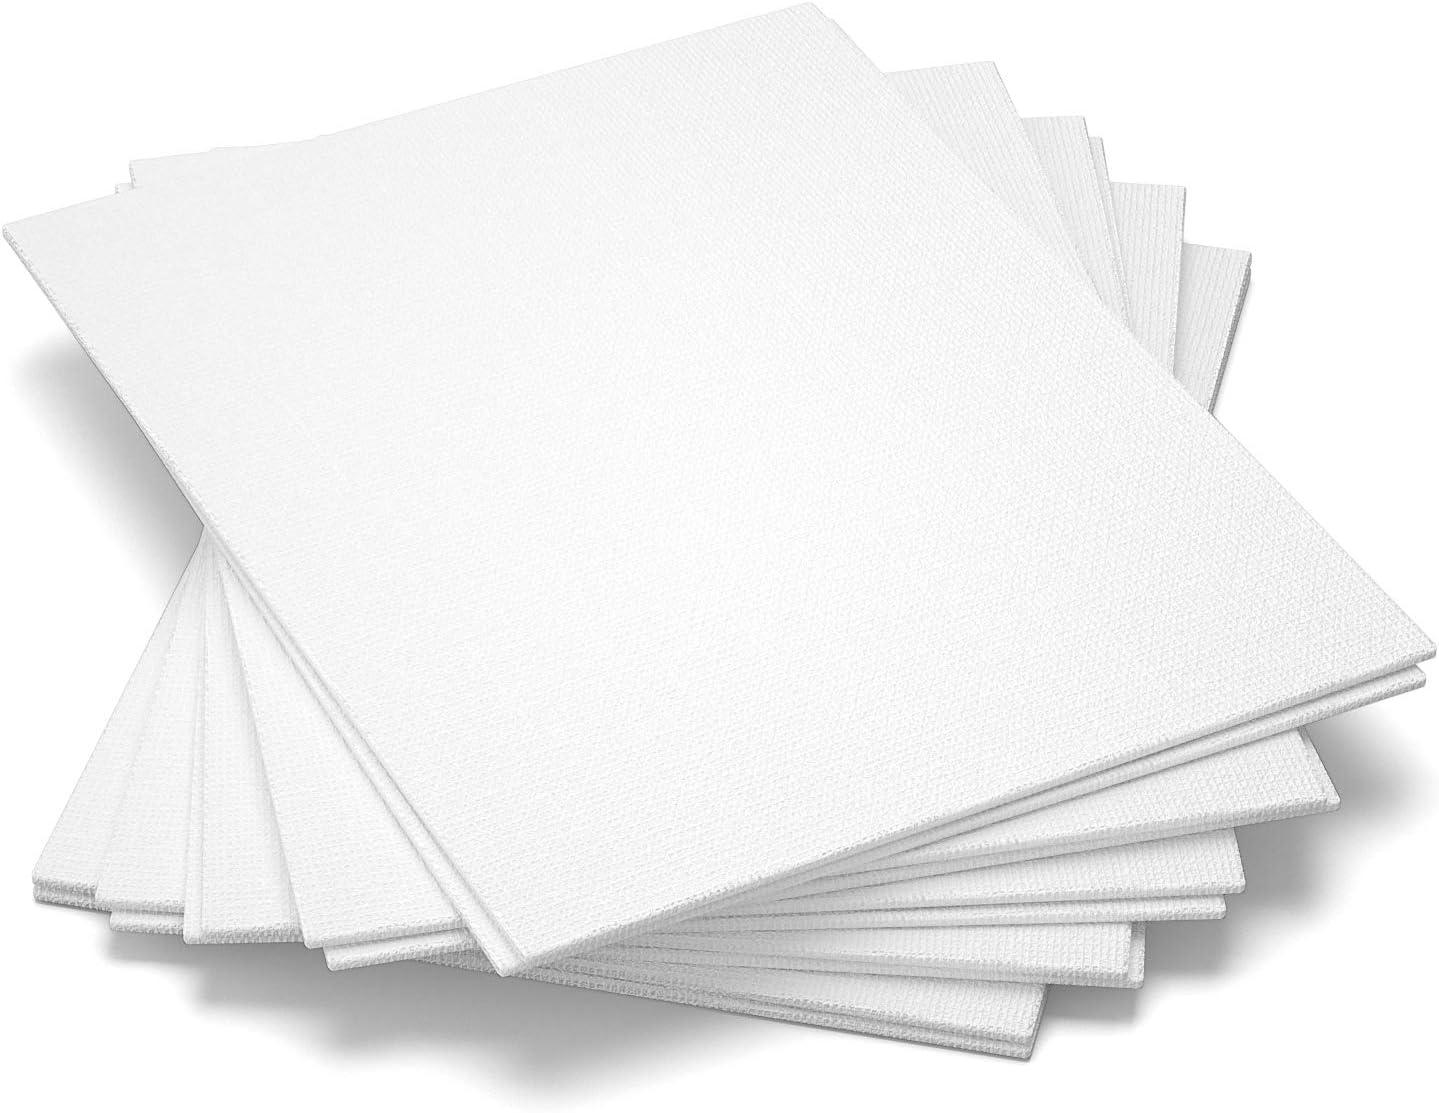 10 Pack Mini Canvas Panels 4 inch x 4 inch, 100% Cotton White Blank Mini Small Stretched Canvas Boards for Painting Craft Drawing Small Acrylics